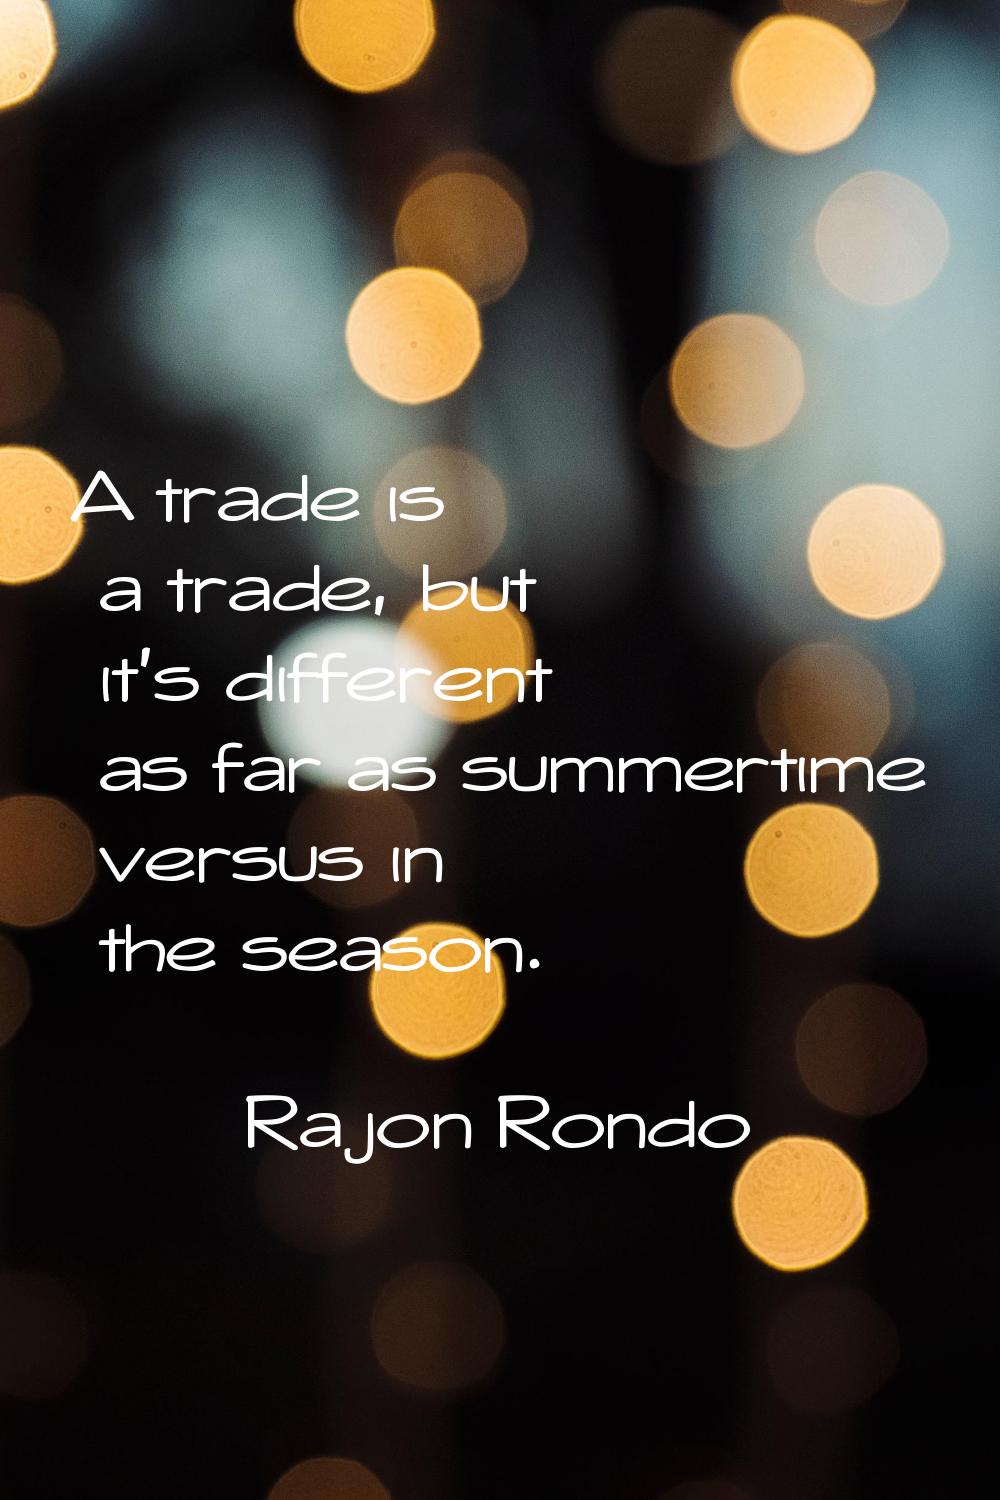 A trade is a trade, but it's different as far as summertime versus in the season.